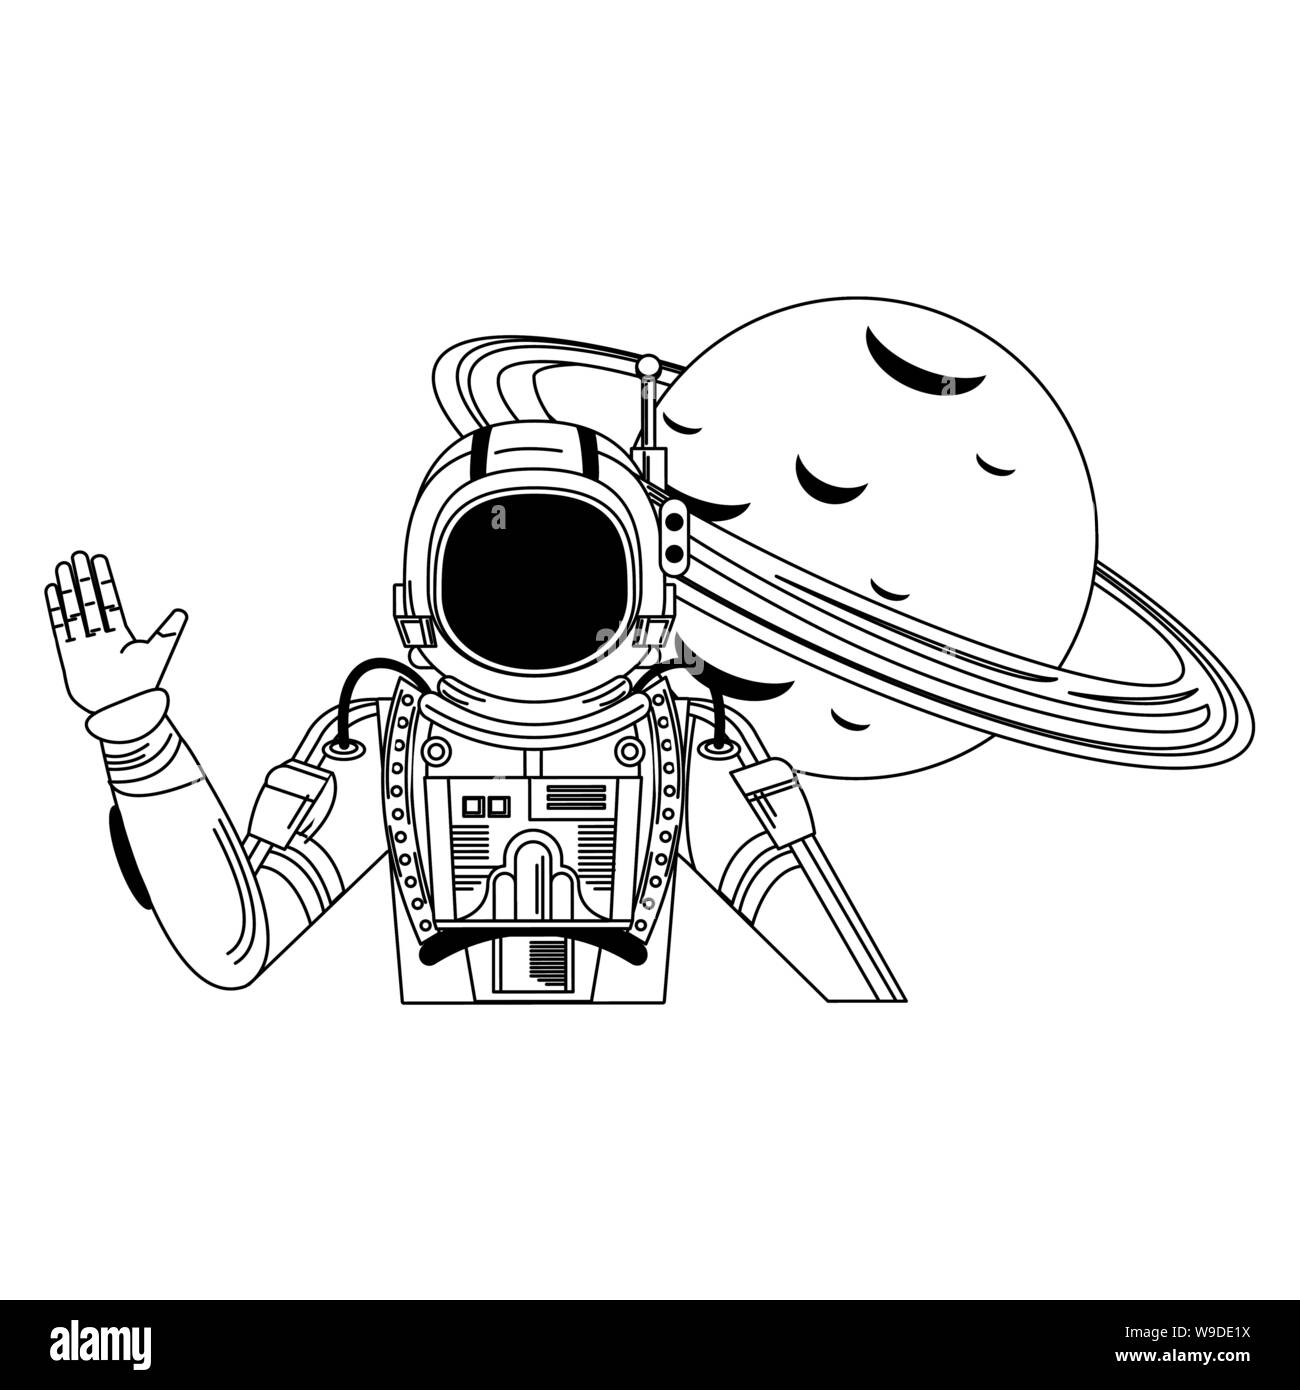 indie, space, and art image | Space drawings, Galaxy drawings, Astronaut  drawing